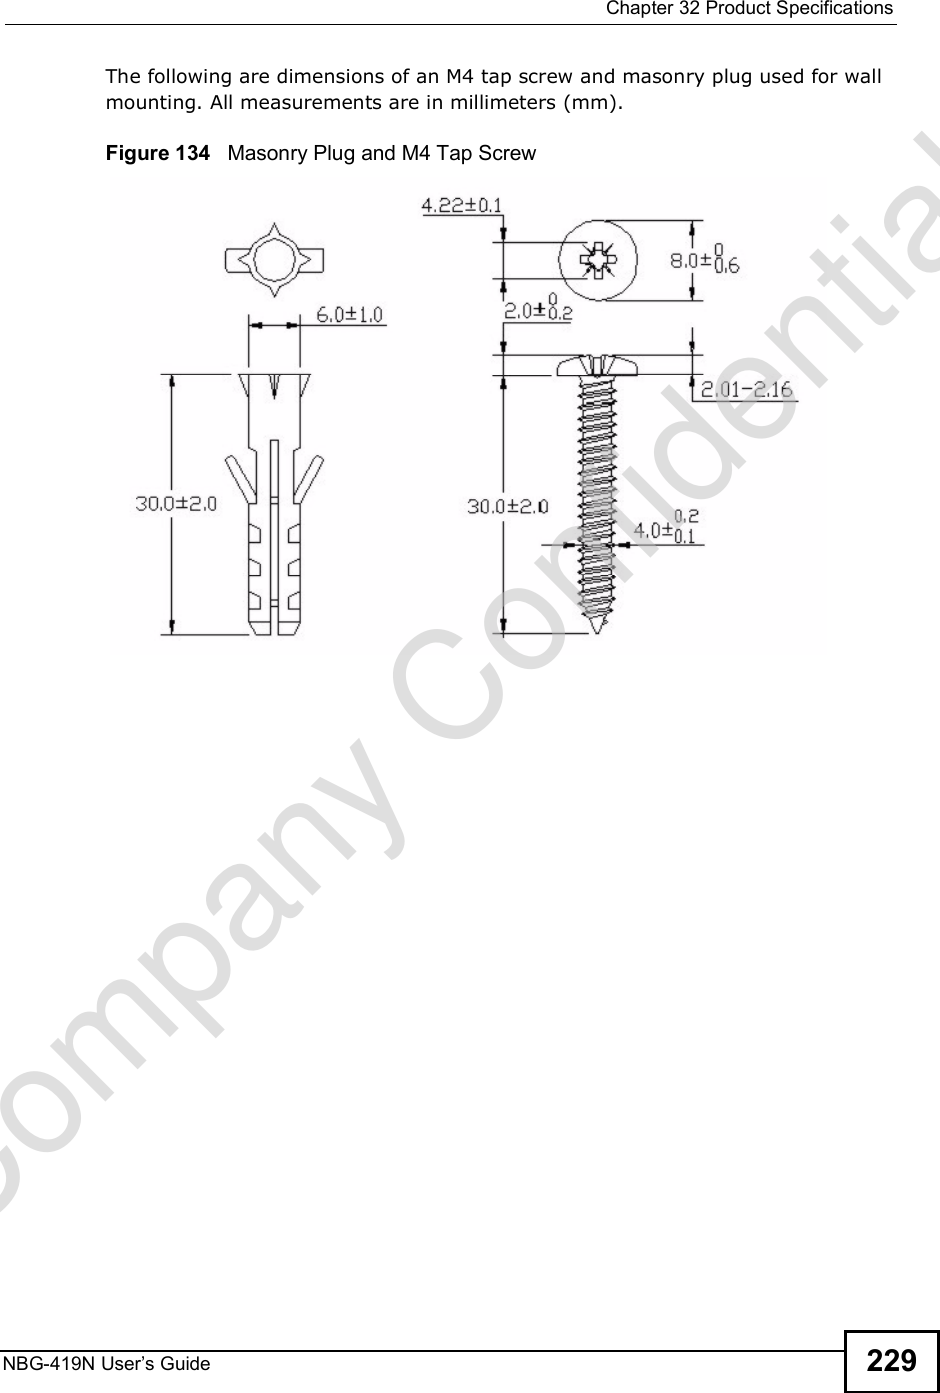  Chapter 32Product SpecificationsNBG-419N User s Guide 229The following are dimensions of an M4 tap screw and masonry plug used for wall mounting. All measurements are in millimeters (mm). Figure 134   Masonry Plug and M4 Tap ScrewCompany Confidential